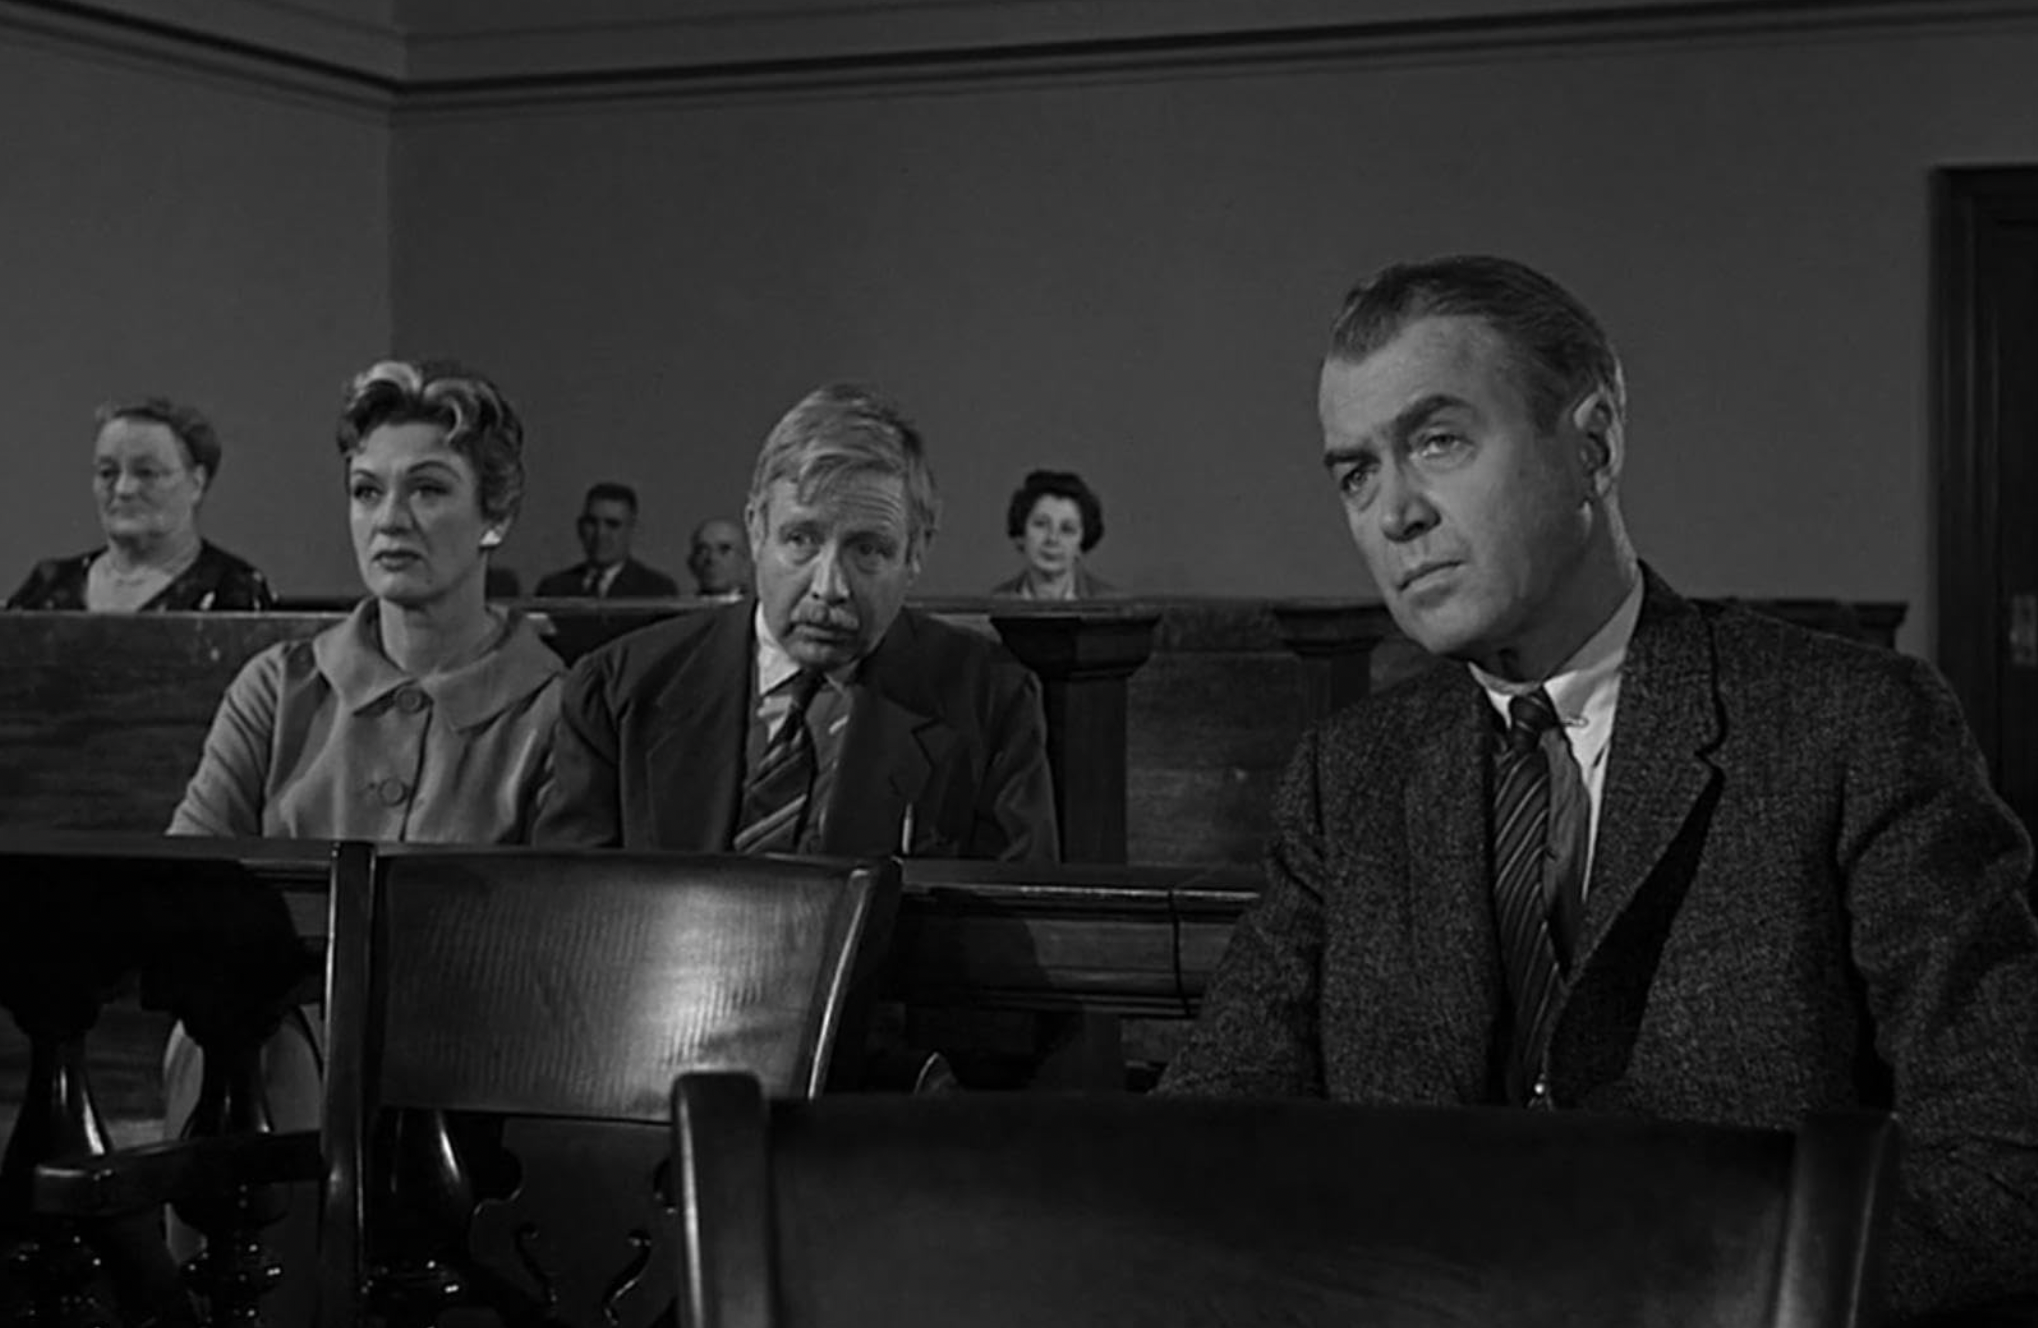 <p><b>Rotten Tomatoes Score</b>: 100%</p><p>In this Otto Preminger 1959 courtroom drama, James Stewart delivers one of his finest roles as a small-town lawyer tasked with defending a soldier accused of murder. </p><p>The film's subtle approach to controversial subjects and use of real locations instead of studio sets were revolutionary at the time. The jazz score by Duke Ellington also adds to the film's atmosphere and tension. </p><p><b>Critics said: "</b>One of cinema's greatest courtroom dramas, Anatomy of a Murder is tense, thought-provoking, and brilliantly acted, with great performances from James Stewart and George C. Scott." <a href="https://www.rottentomatoes.com/m/anatomy-of-a-murder/reviews?intcmp=rt-what-to-know_read-critics-reviews">RT</a></p><p><i>This article was produced and syndicated by <a href="https://mediafeed.org/">MediaFeed.</a></i></p>